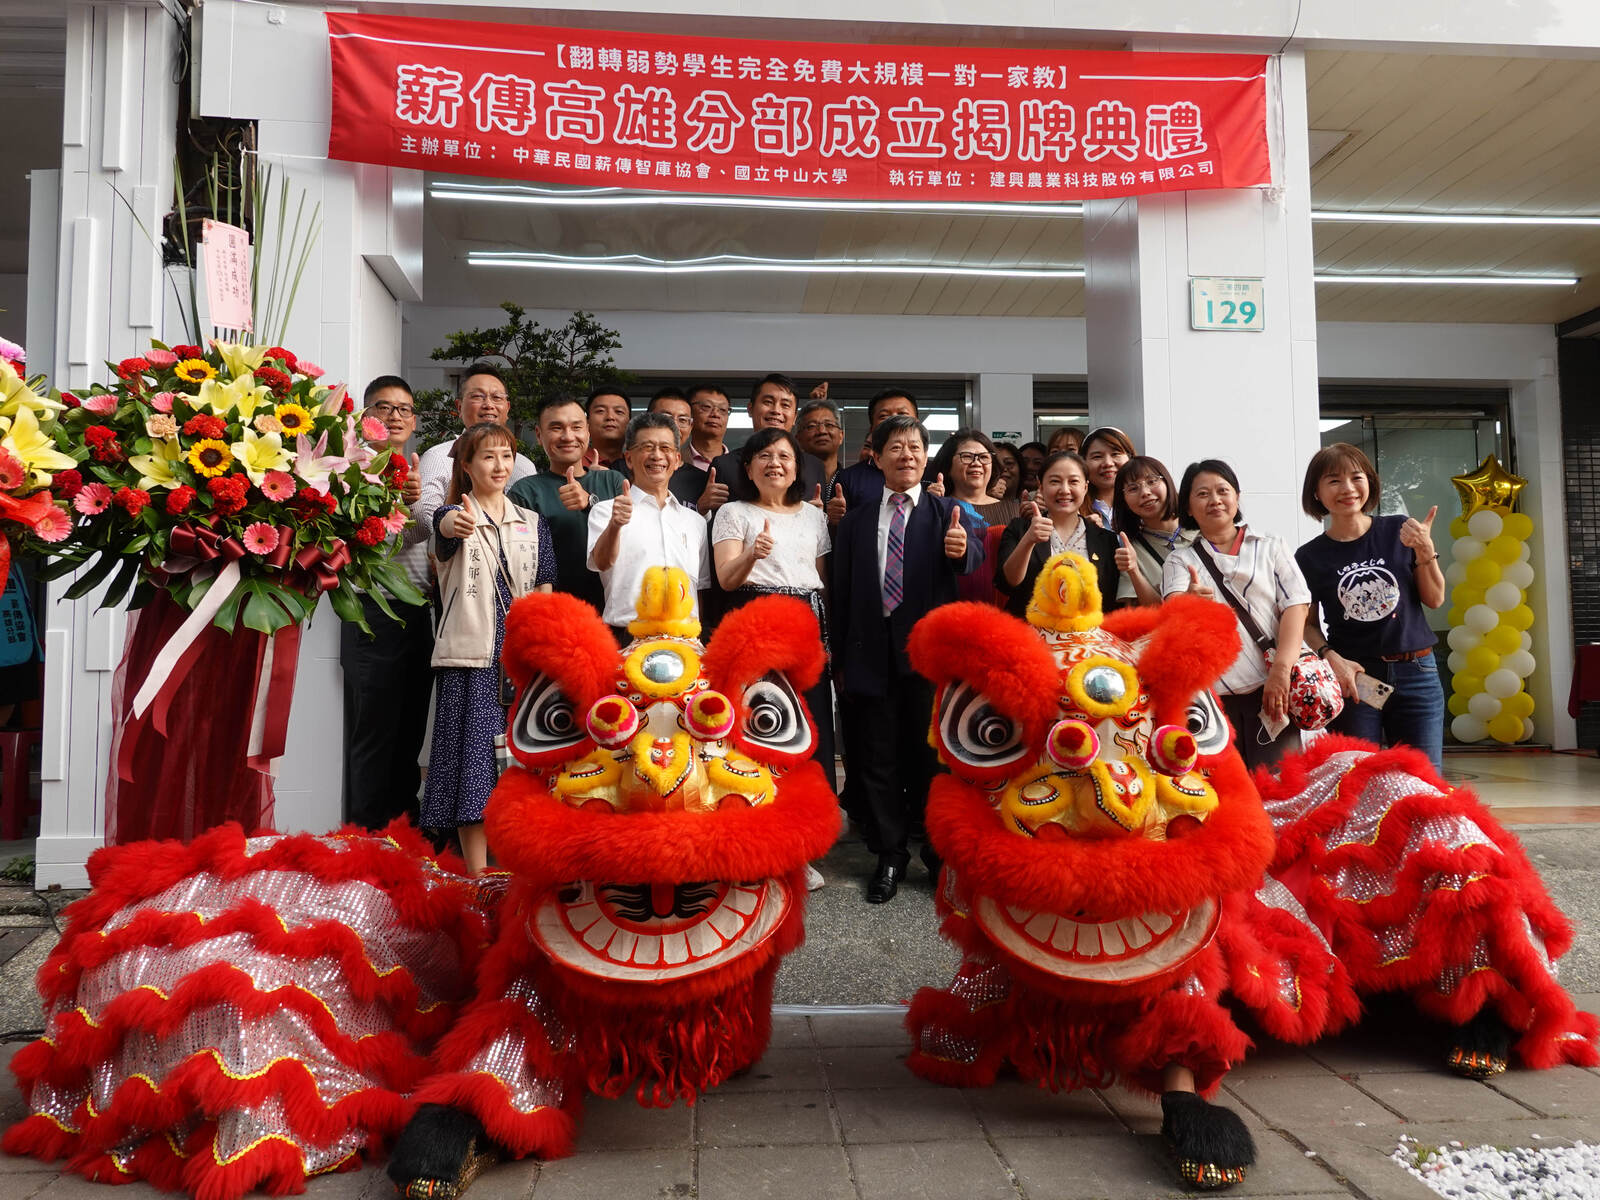 To break the intergenerational duplication of disadvantaged families, NSYSU collaborated with Xin Chuan Used Bookstore at Minxiong Township in Chiayi County and held the "Xin Chuan Kaohsiung Branch Unveiling Ceremony"